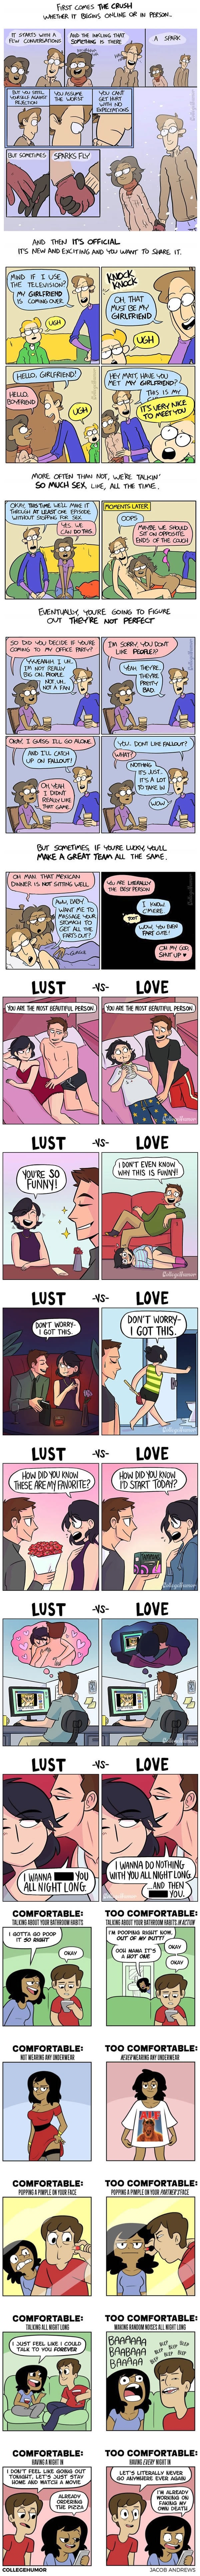 Comics that perfectly describe relationships